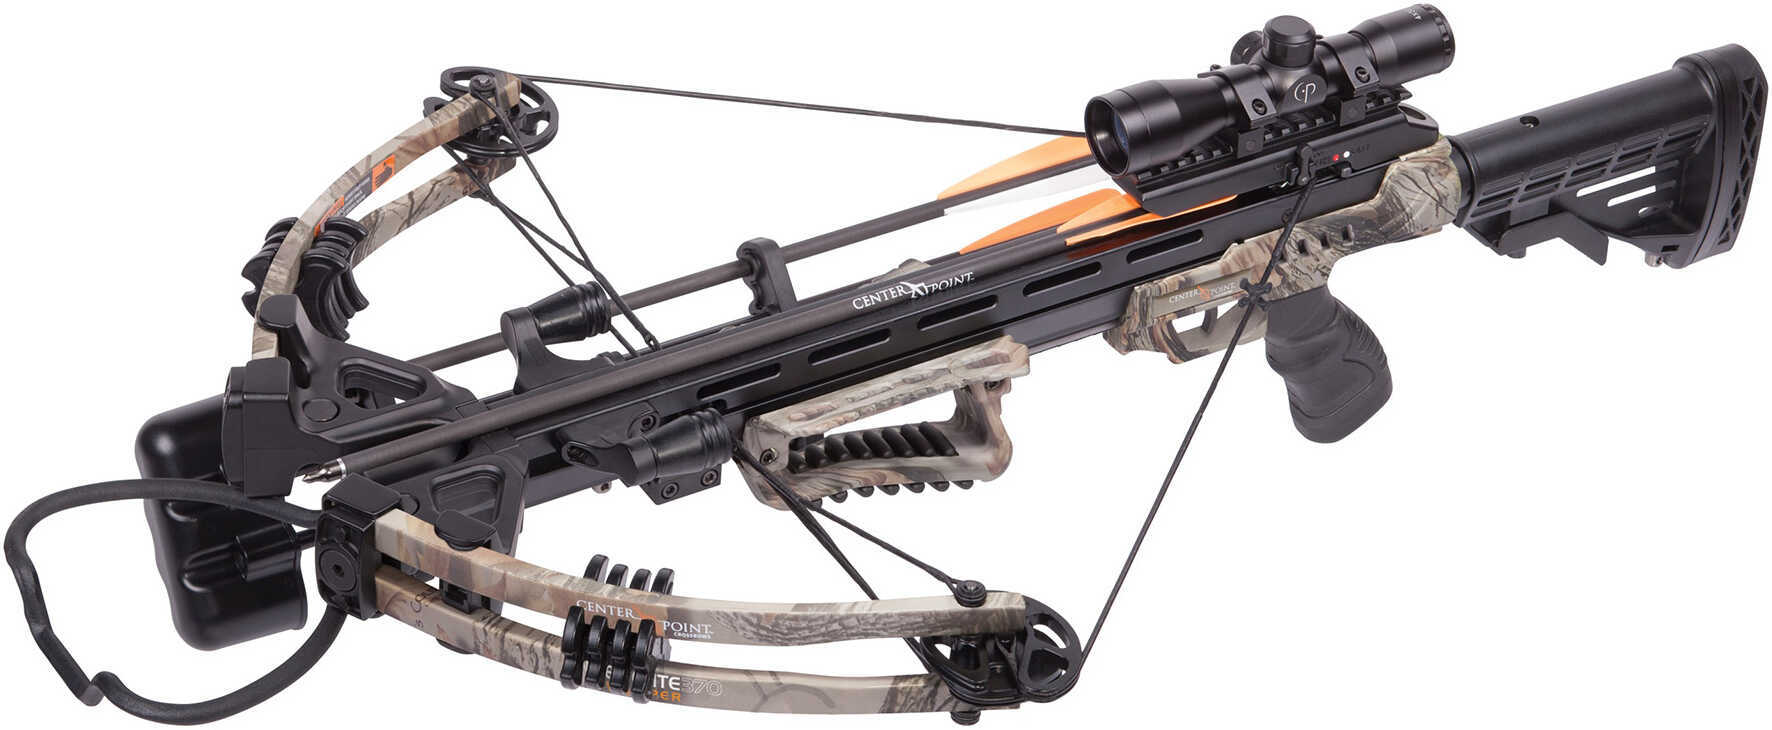 CenterPoint Sniper Elite 370 Crossbow Package  Model: AXCSEW185CK